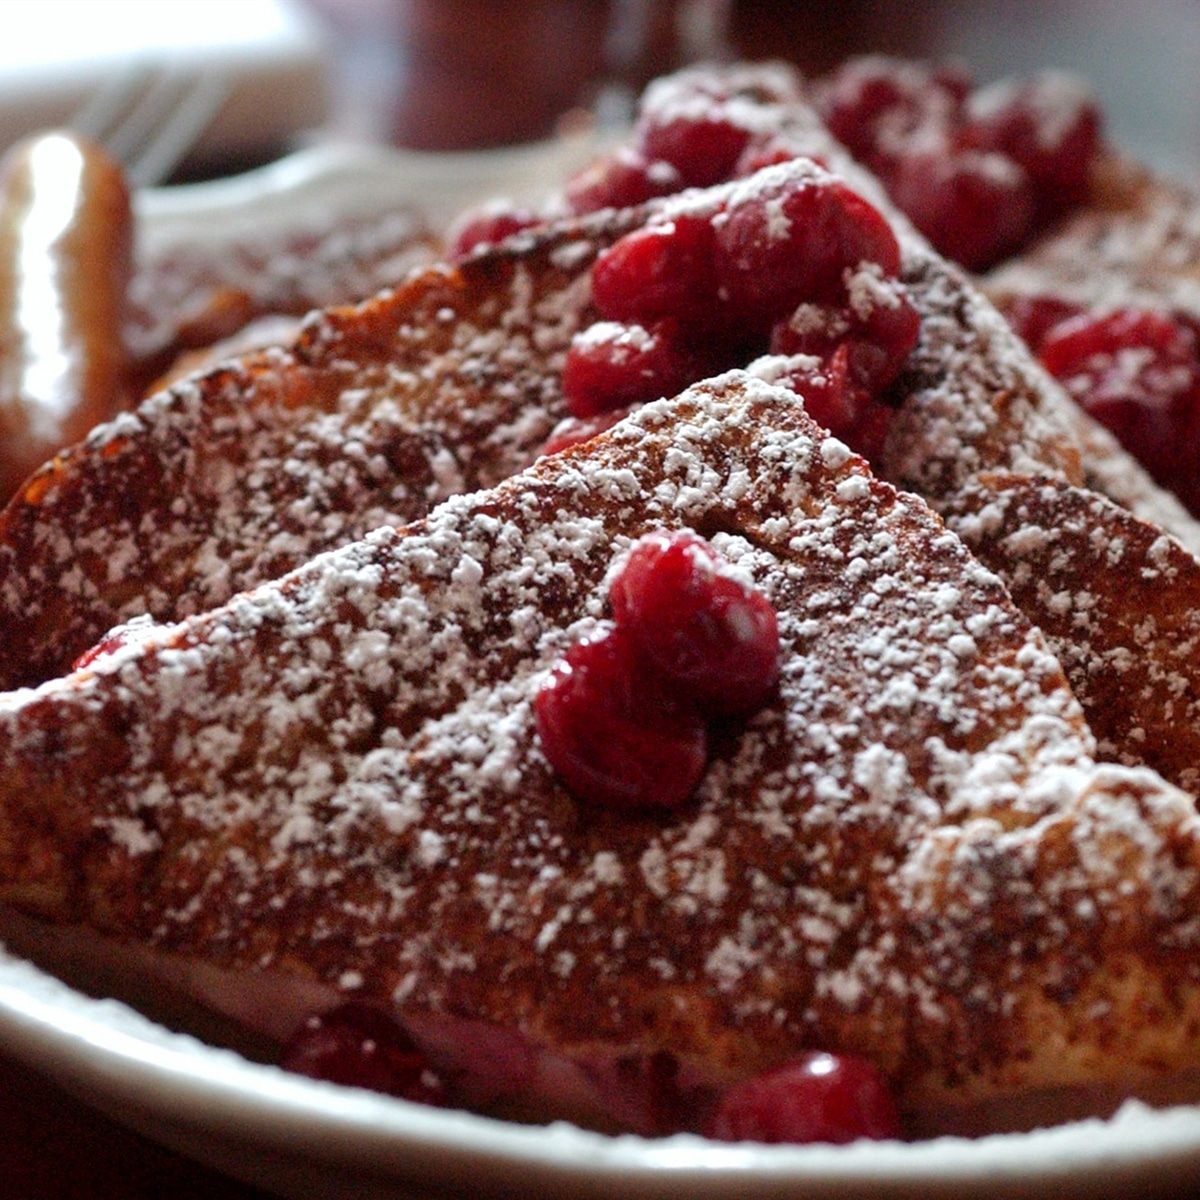 A plate of cherry stuffed french toast.